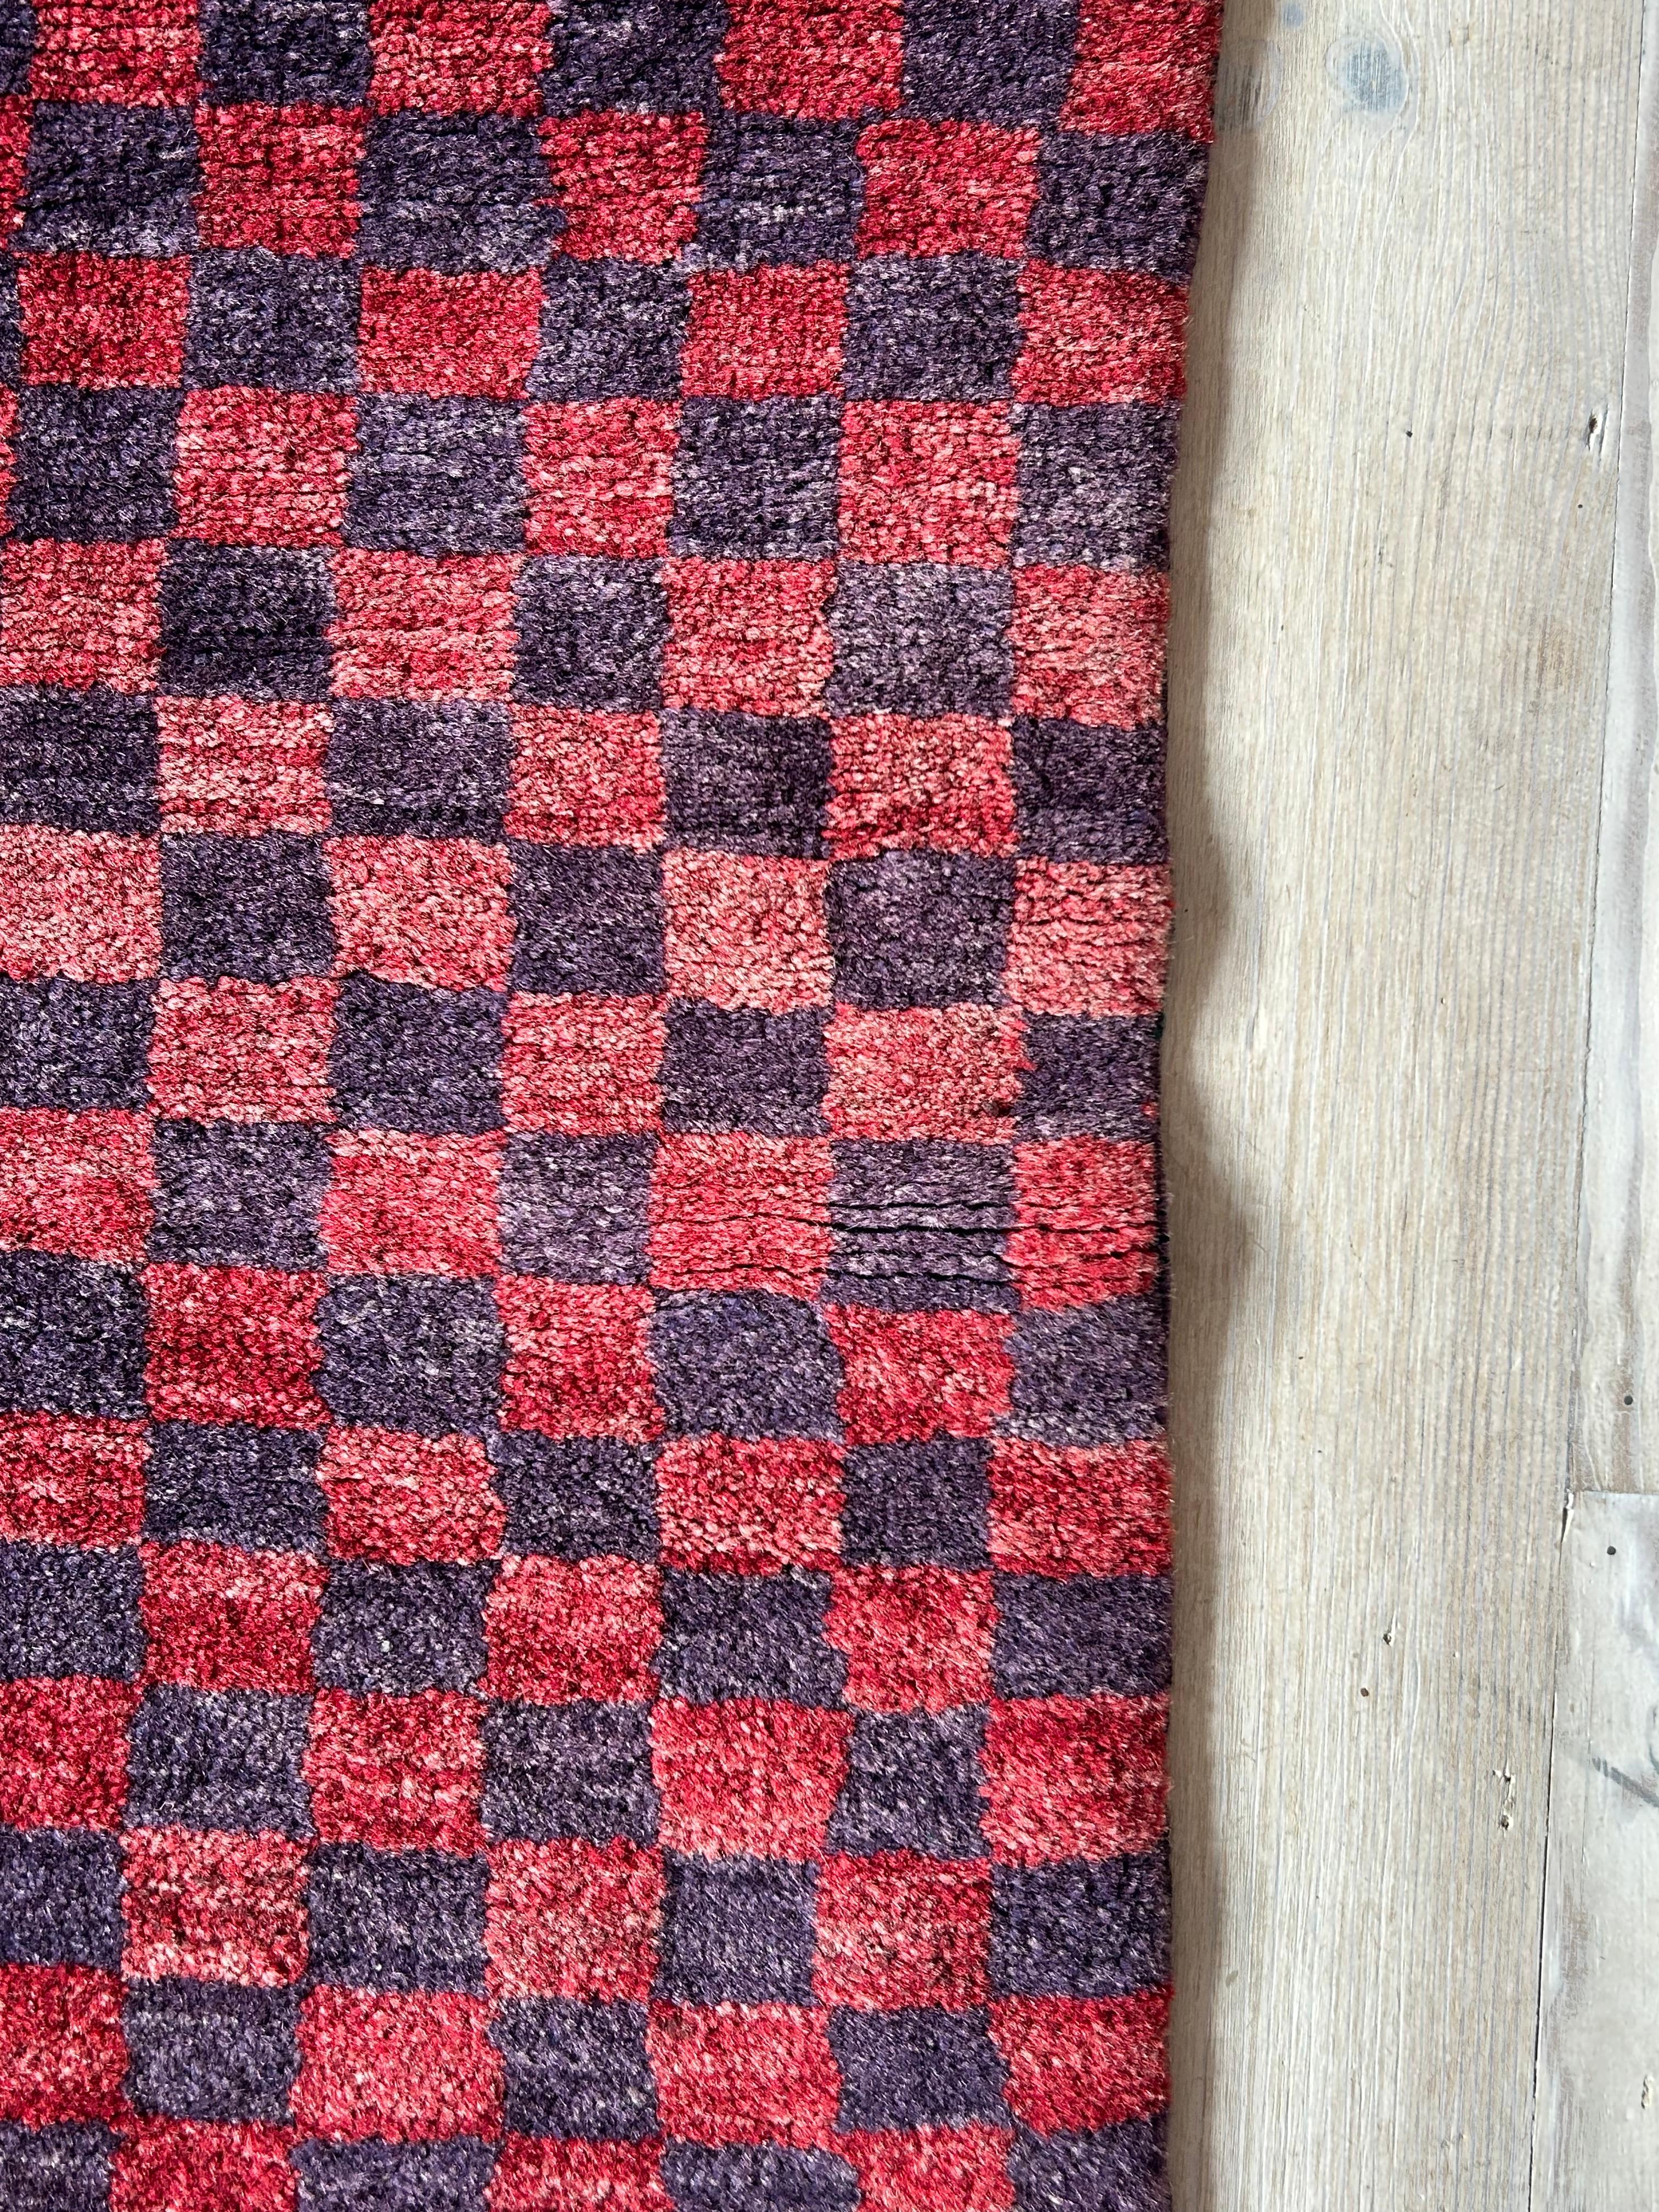 Vintage Tulu Rug with Red and Purple Check Pattern, Turkey, 20th Century For Sale 2